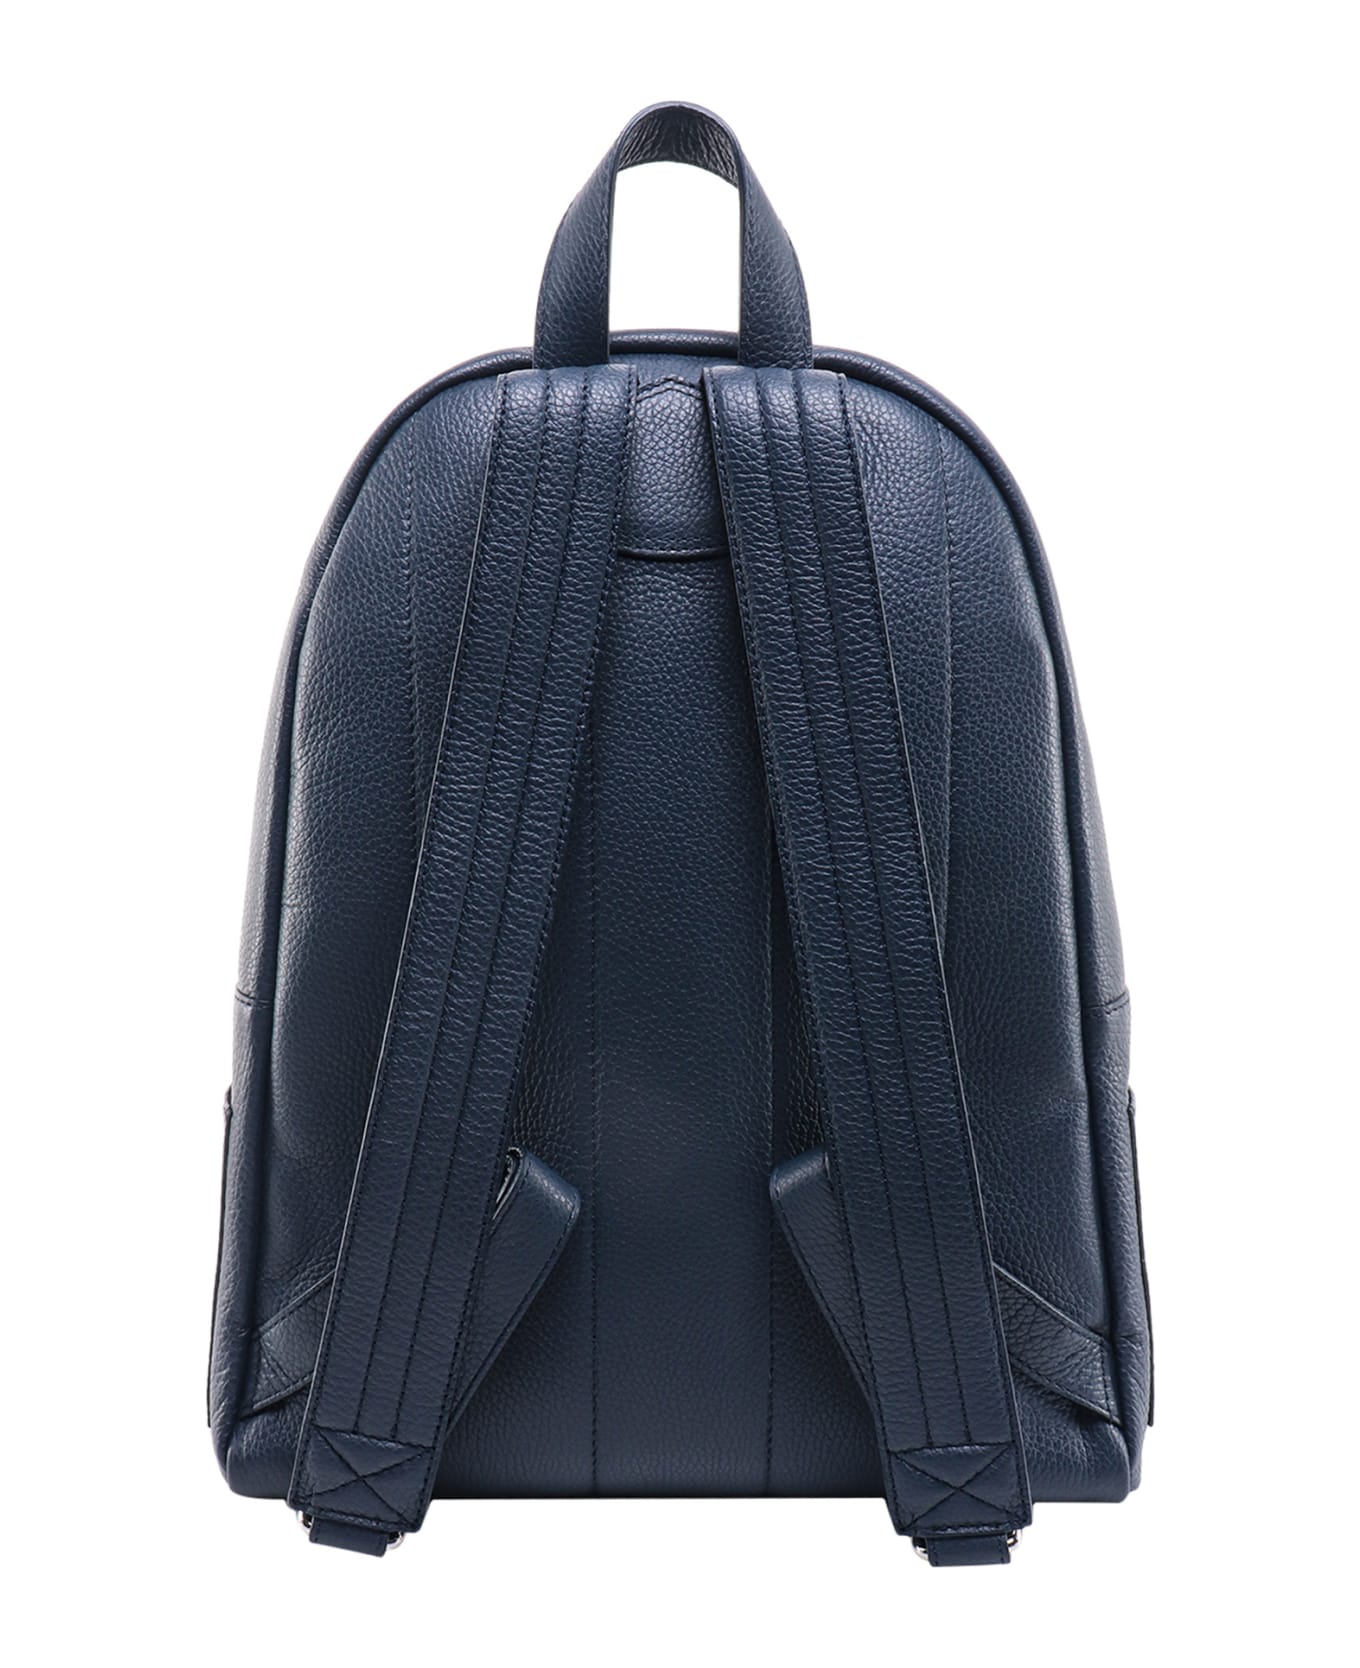 Orciani Backpack - Blue バックパック